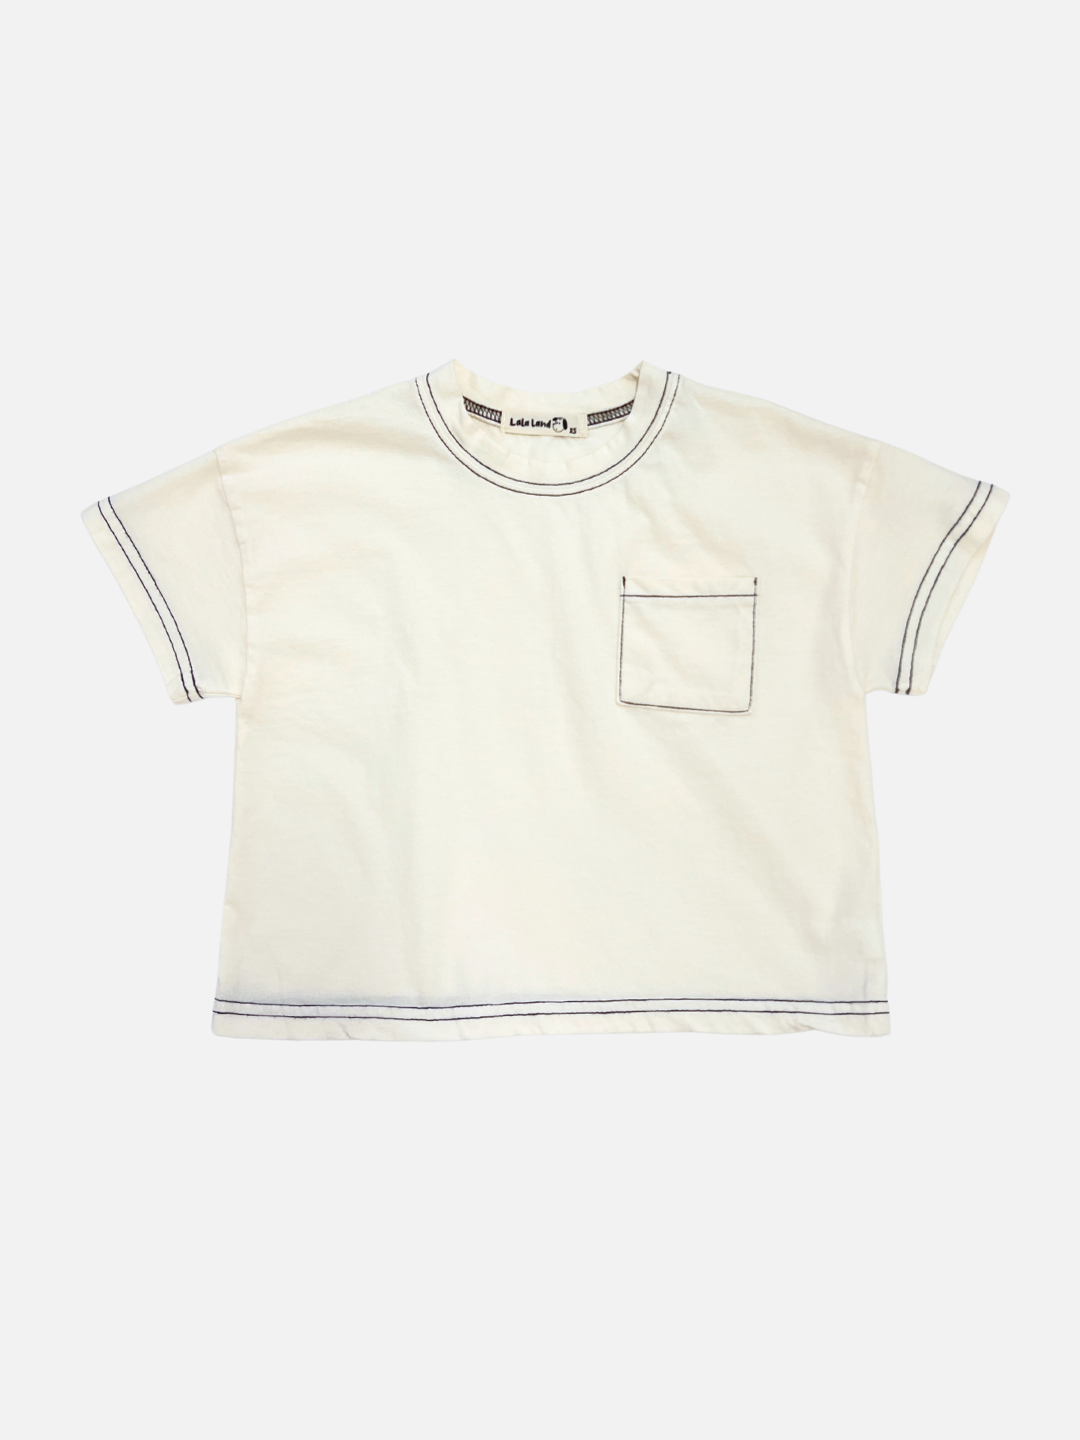 Front view of the kids' stitch pocket tee in Ivory feturing contrast black stitch and a small pocket on the right side